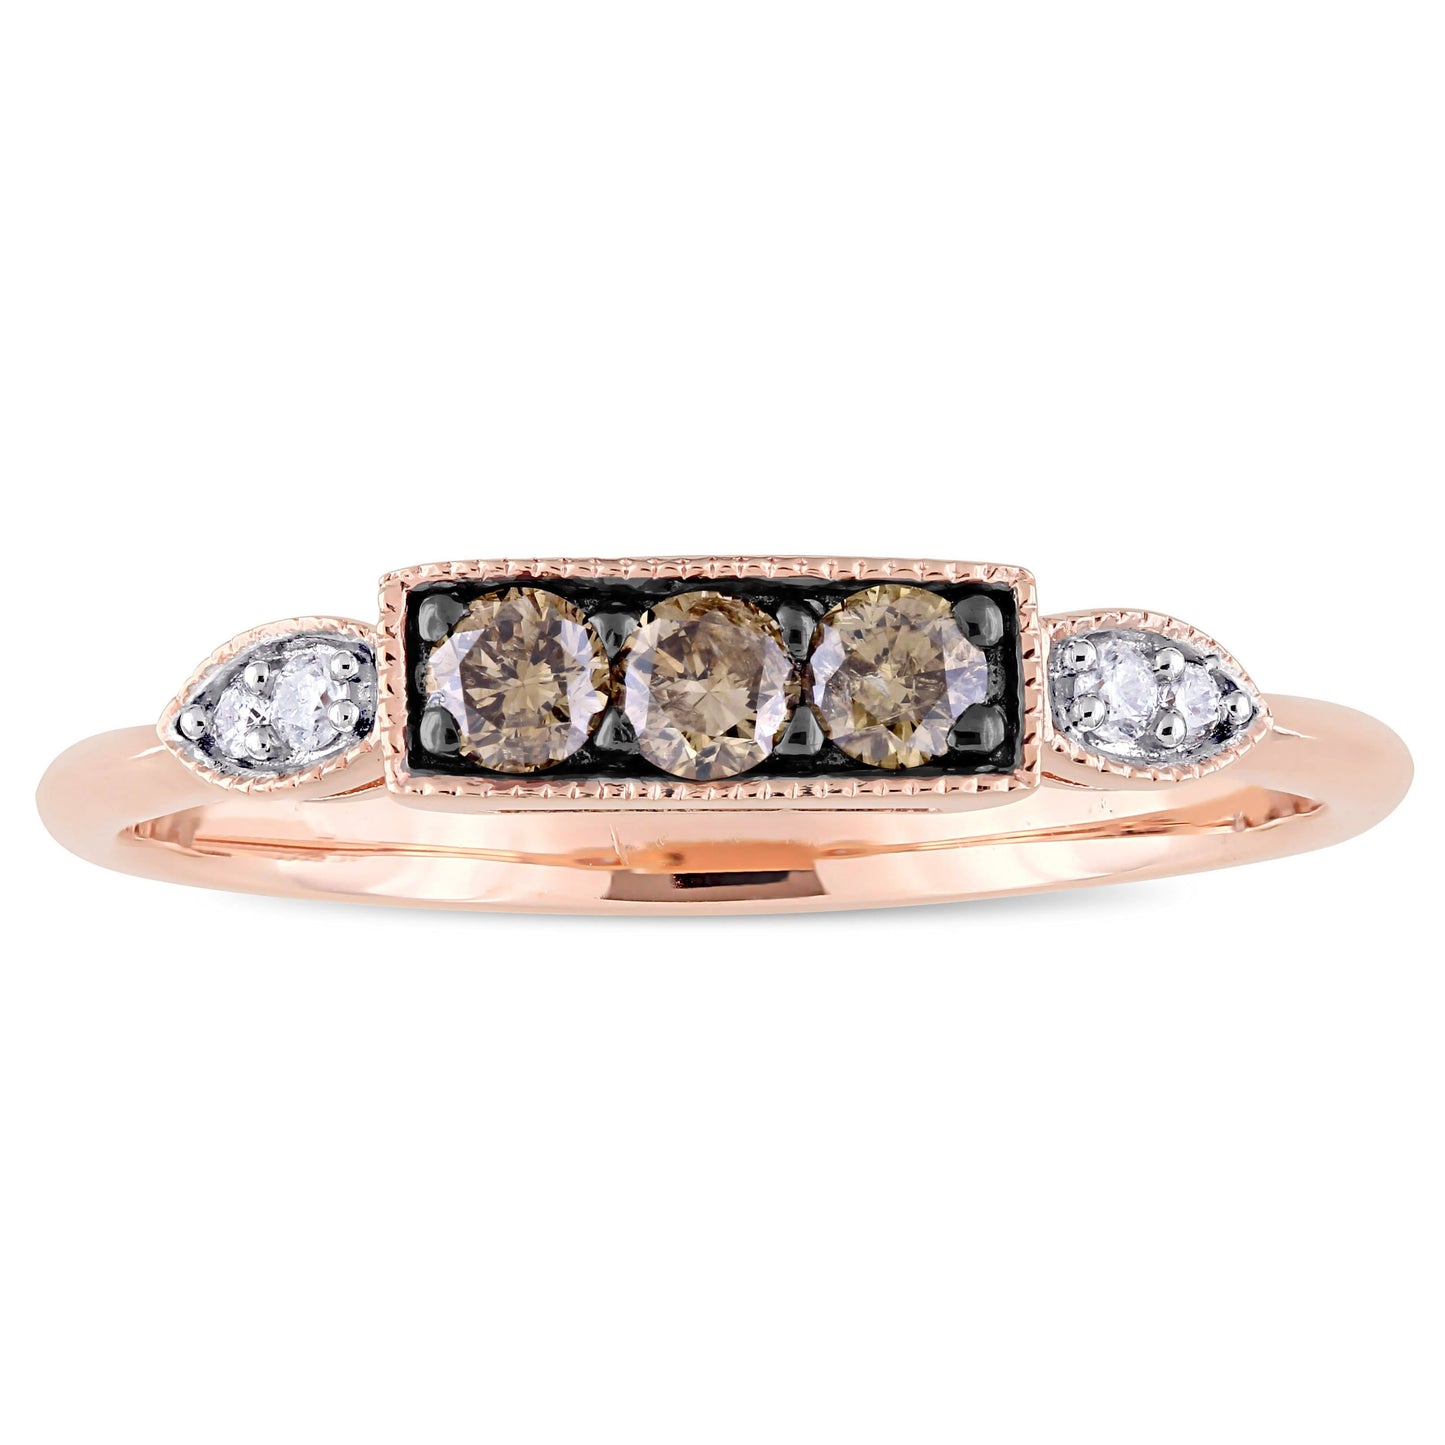 1/4ct Brown and White Diamond Ring in 10k Rose Gold